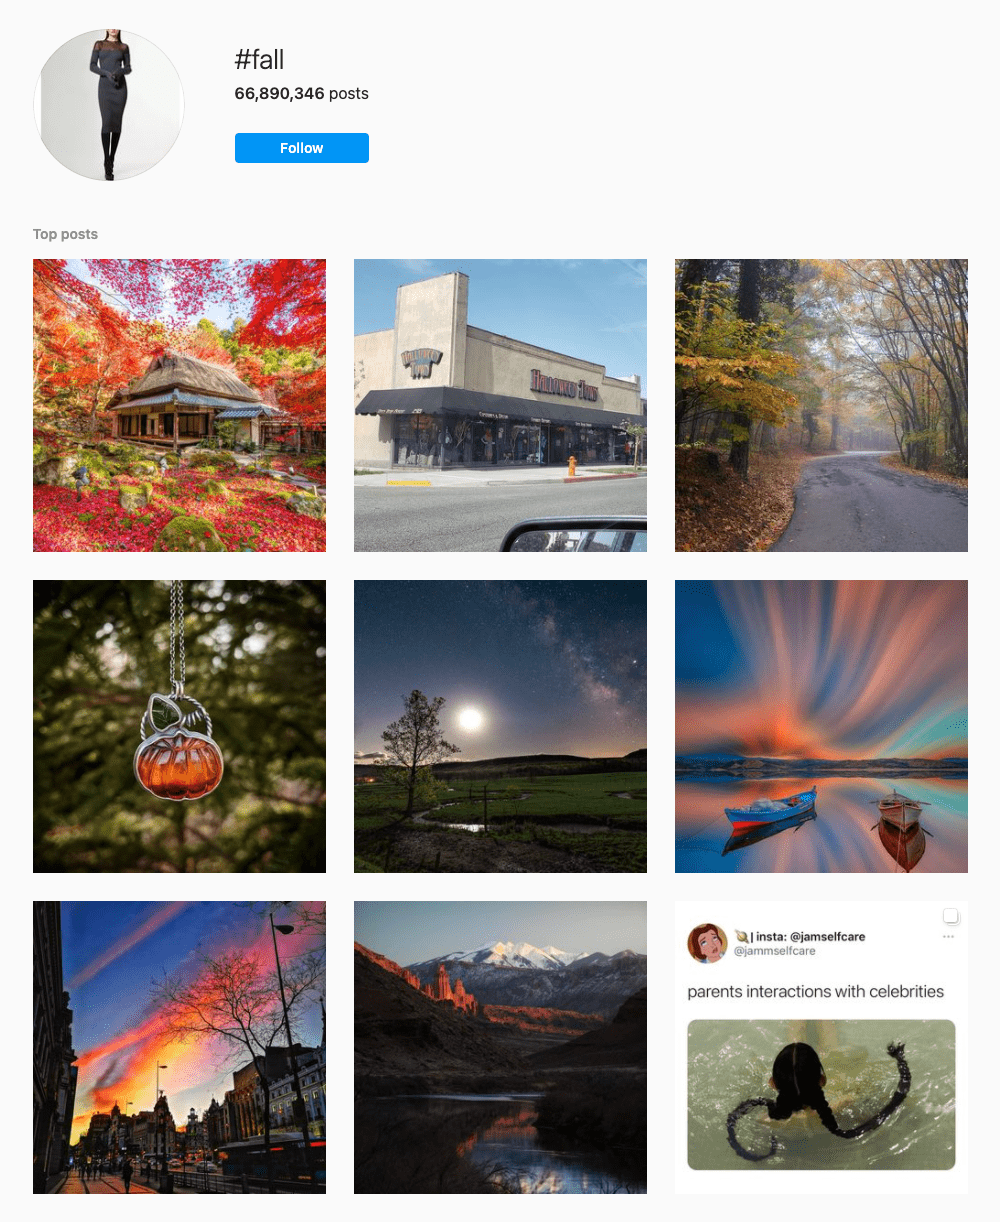 #fall Hashtags for Instagram